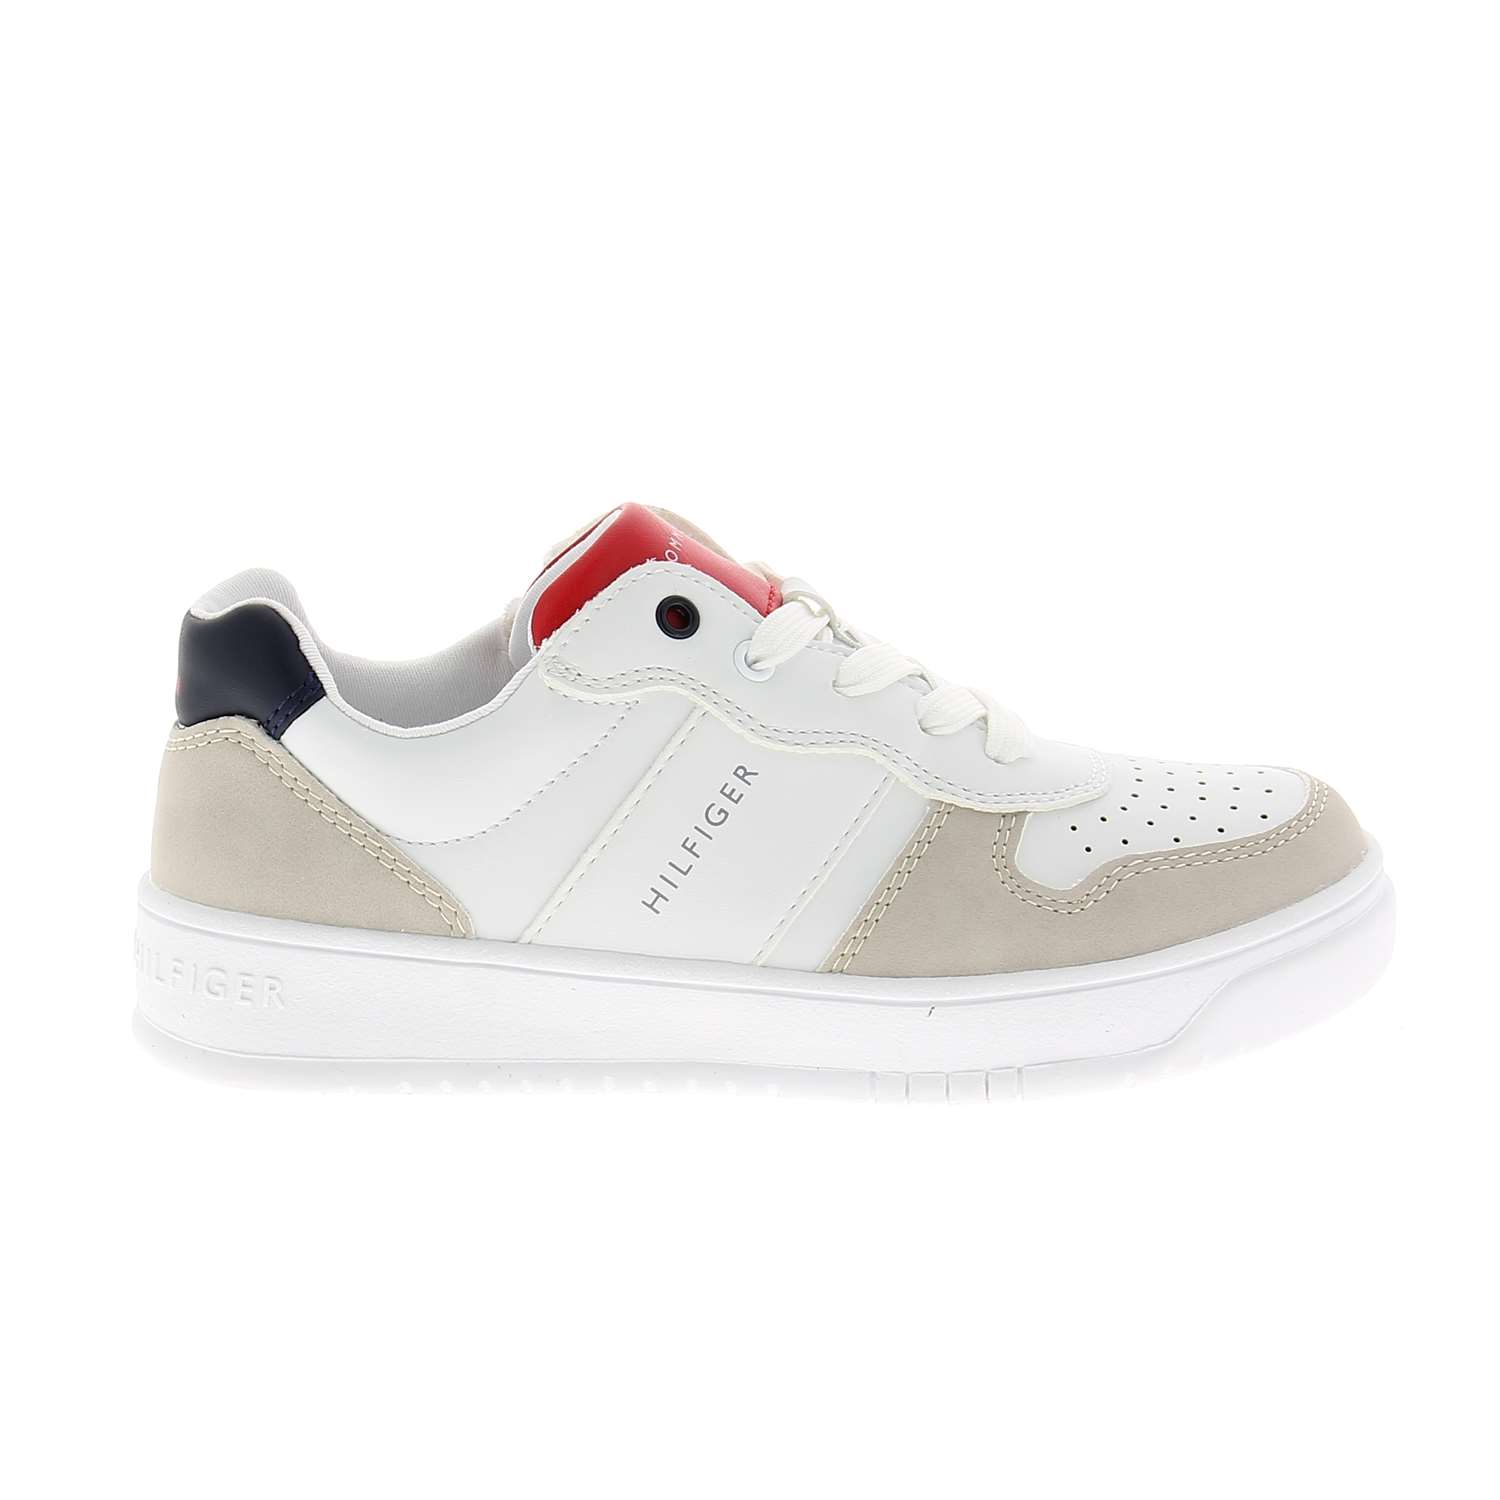 02 - LOW CUT LACE UP - TOMMY HILFIGER - Chaussures basses - Synthétique